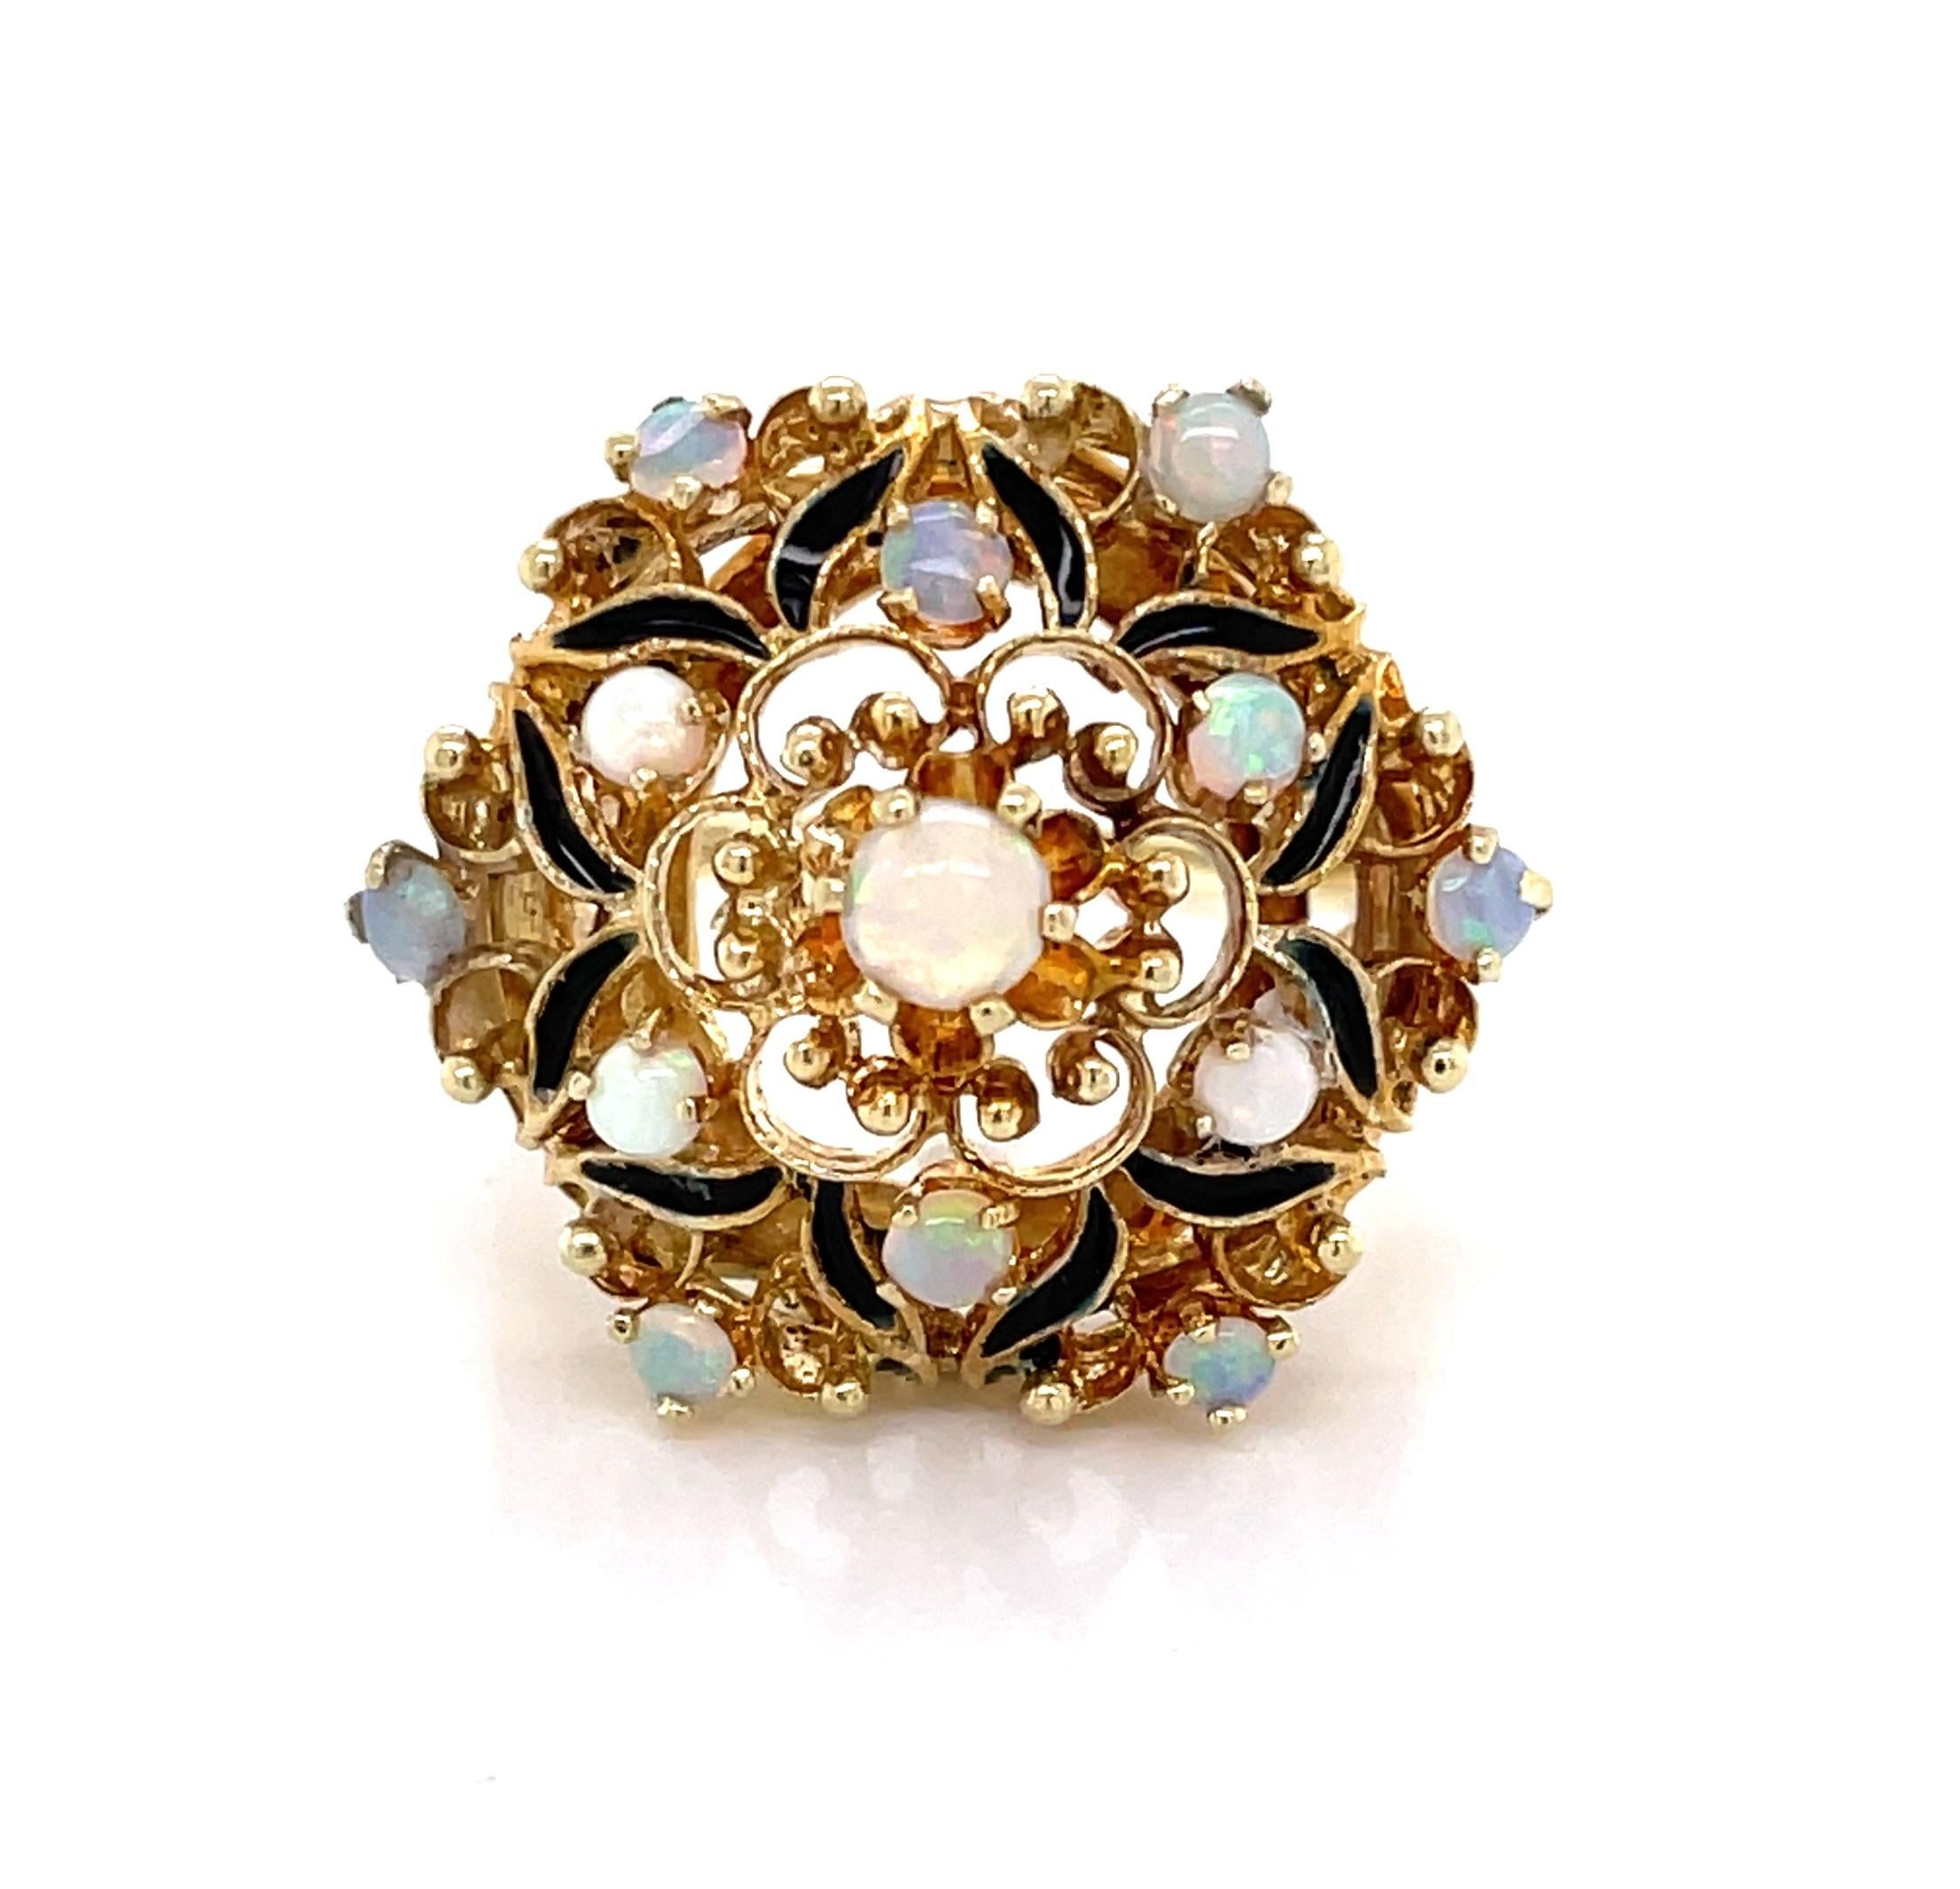 A ribbon of hand painted black enamel outlines the floral inspiration of this artful fourteen karat 14K yellow gold vintage cocktail ring. With an antique style setting, elegant gold filigree sits high a top the ring's ornate gallery and hosts